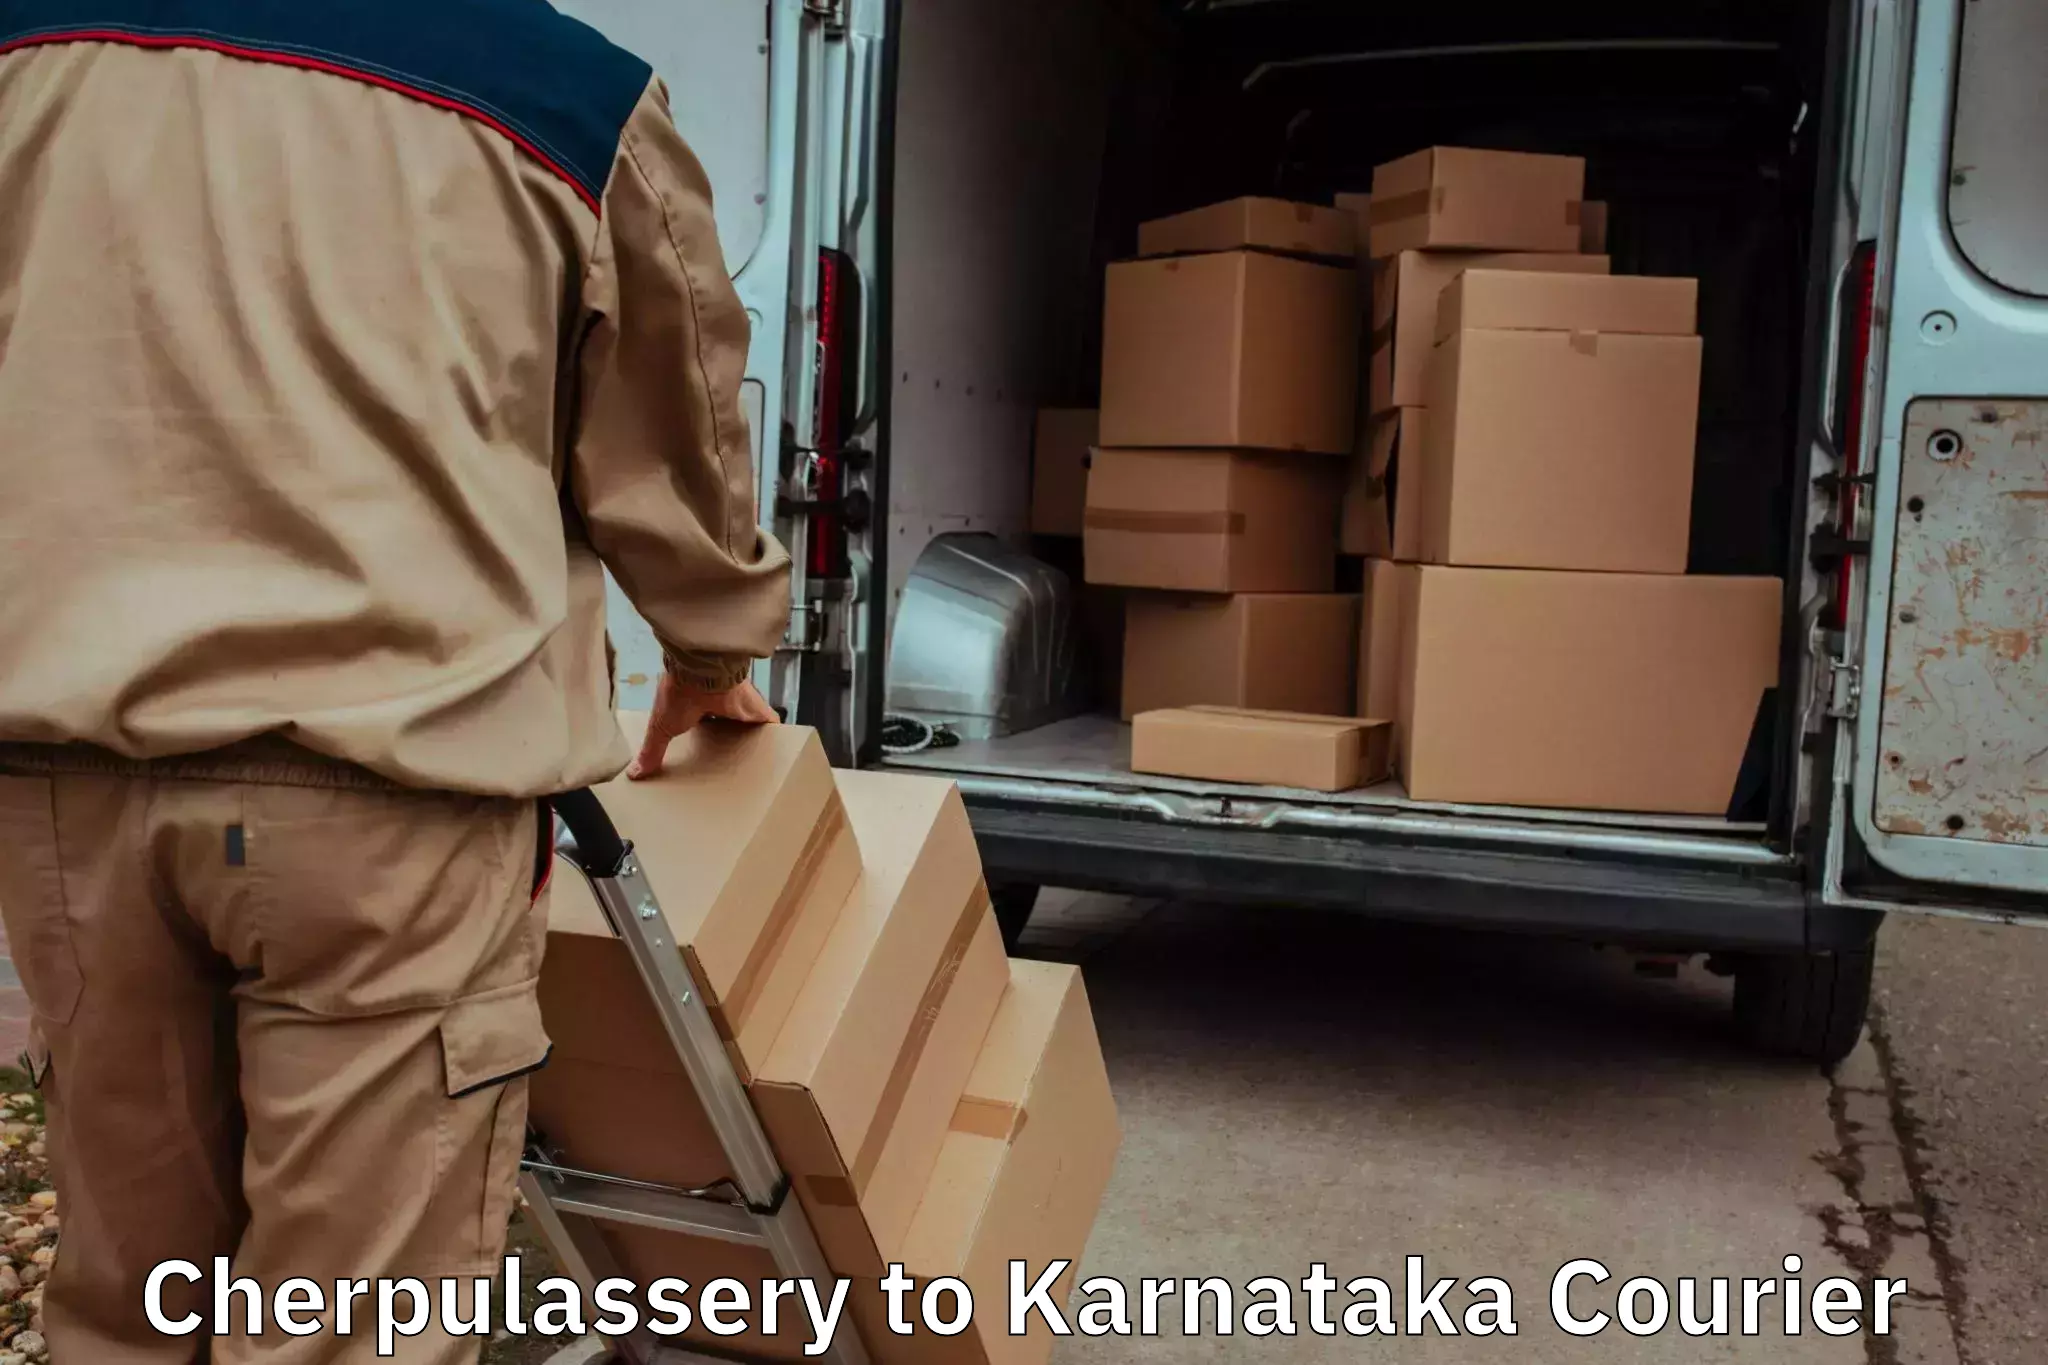 Furniture transport service Cherpulassery to Manipal Academy of Higher Education